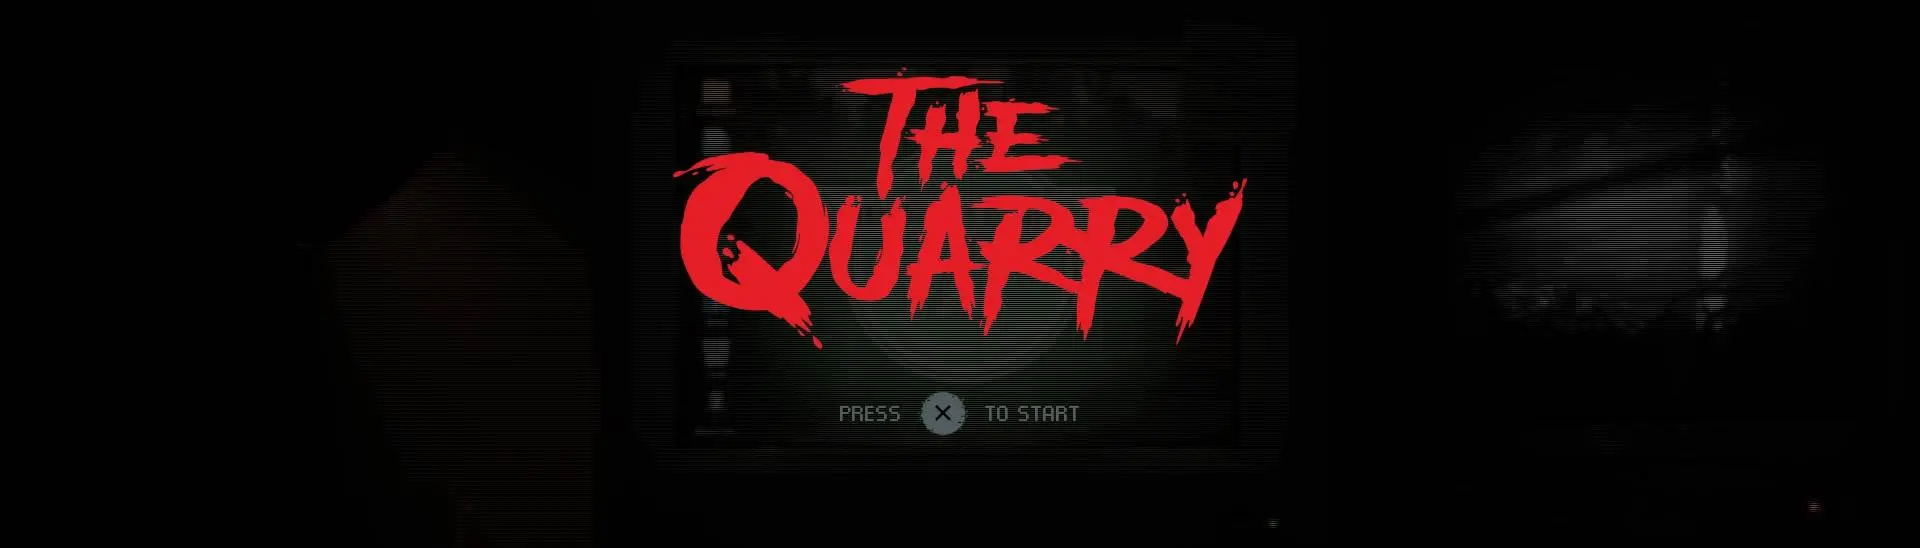 PlayStation 4 Button Prompts at The Quarry Nexus - Mods and Community